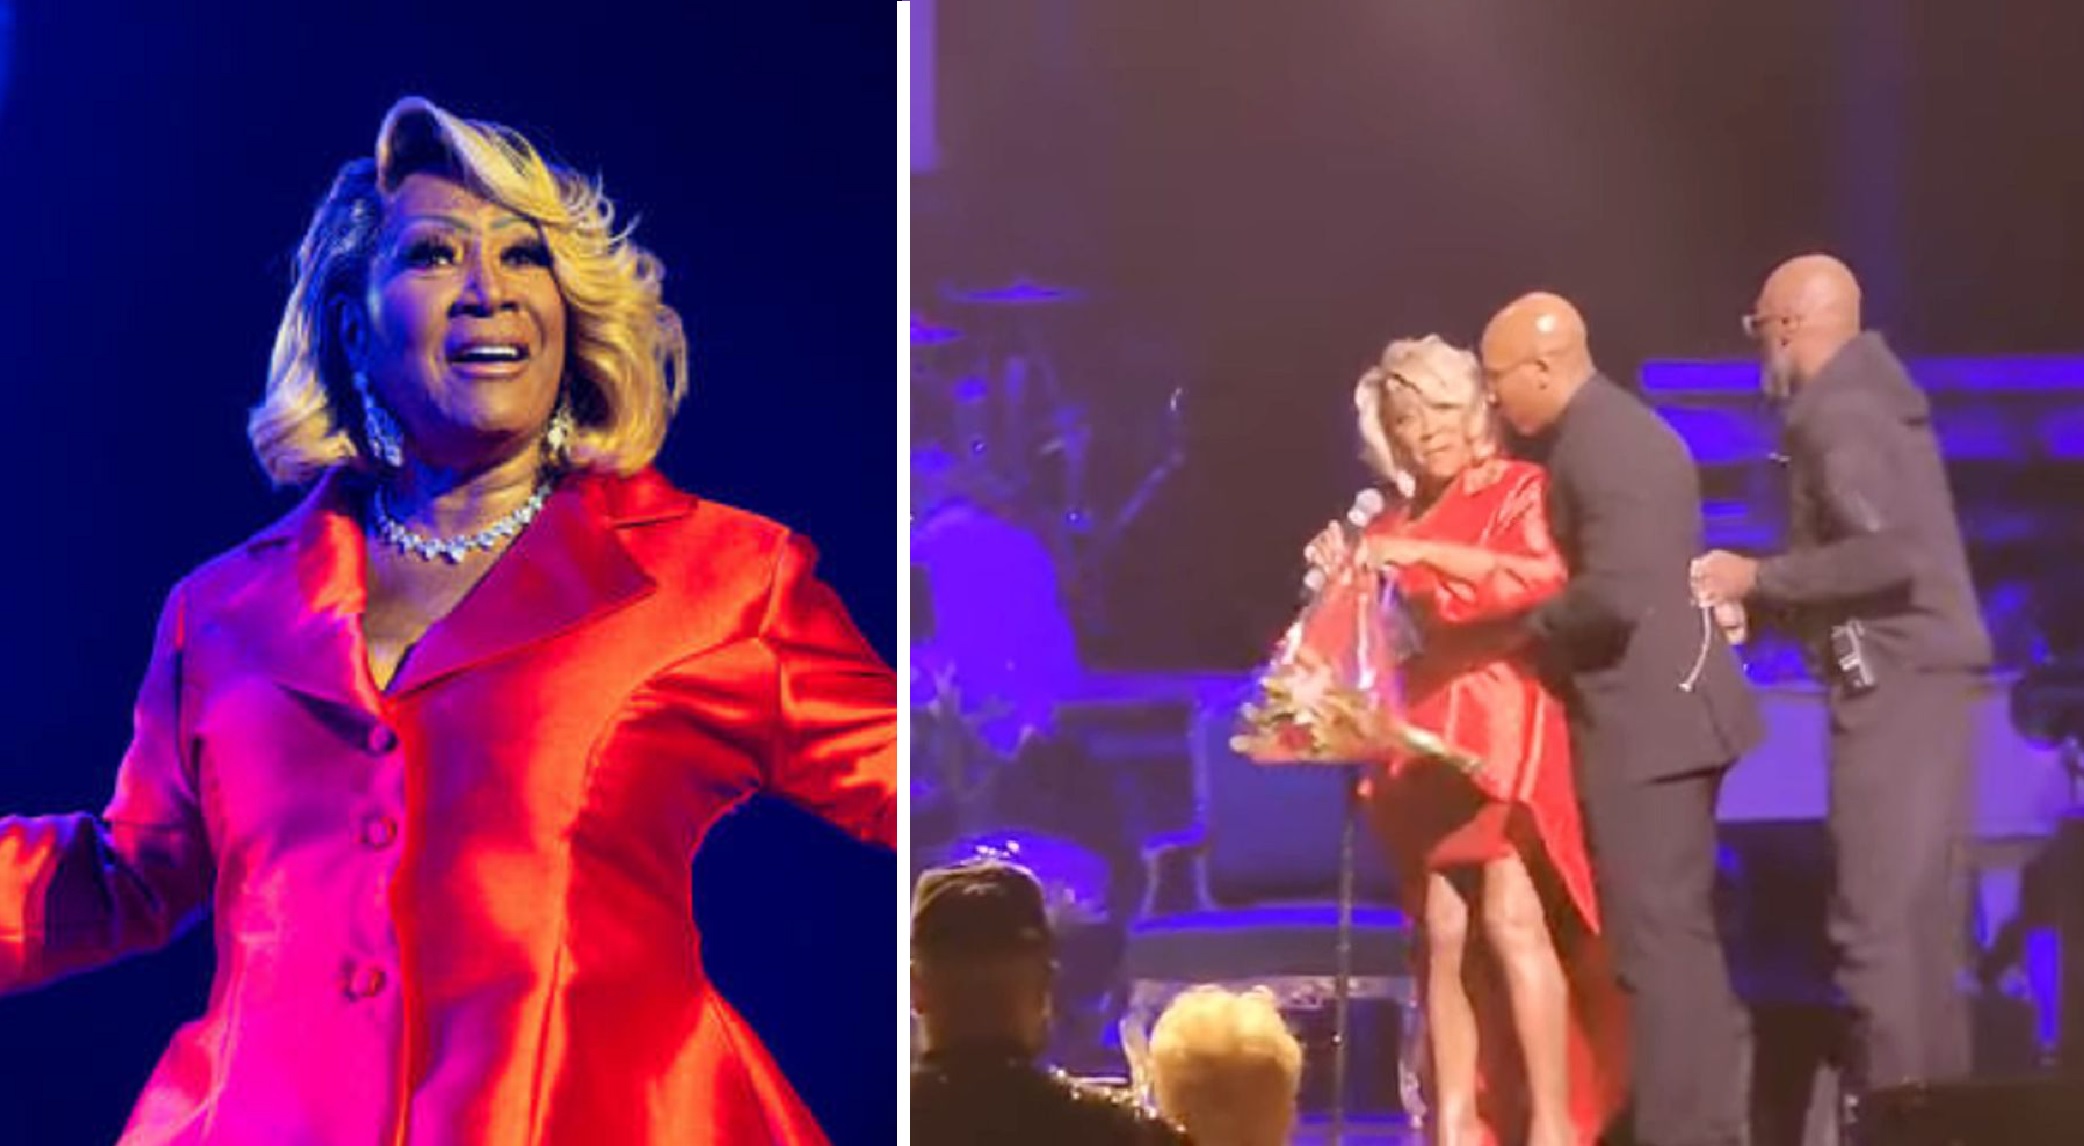 Watch: Patti LaBelle Escorted Off Stage After Bomb Threat At Her Concert